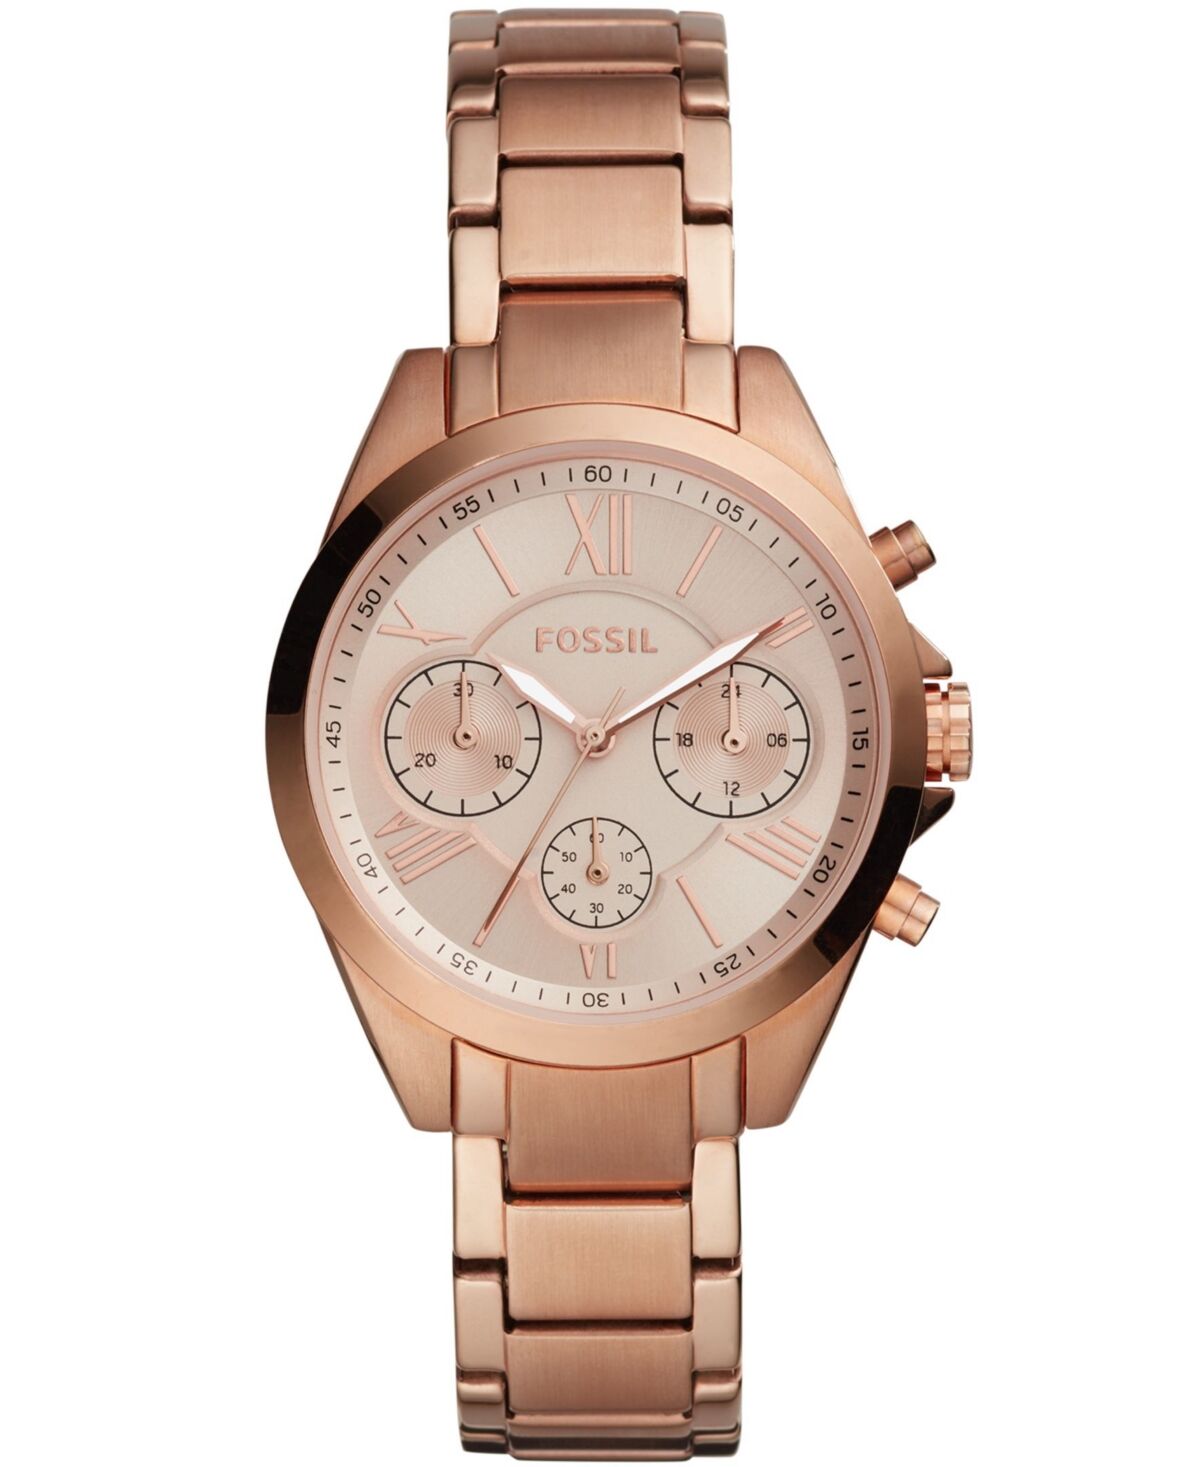 Fossil Women's Modern Courier Chronograph Rose Gold Stainless Steel Watch 36mm - Rose Gold